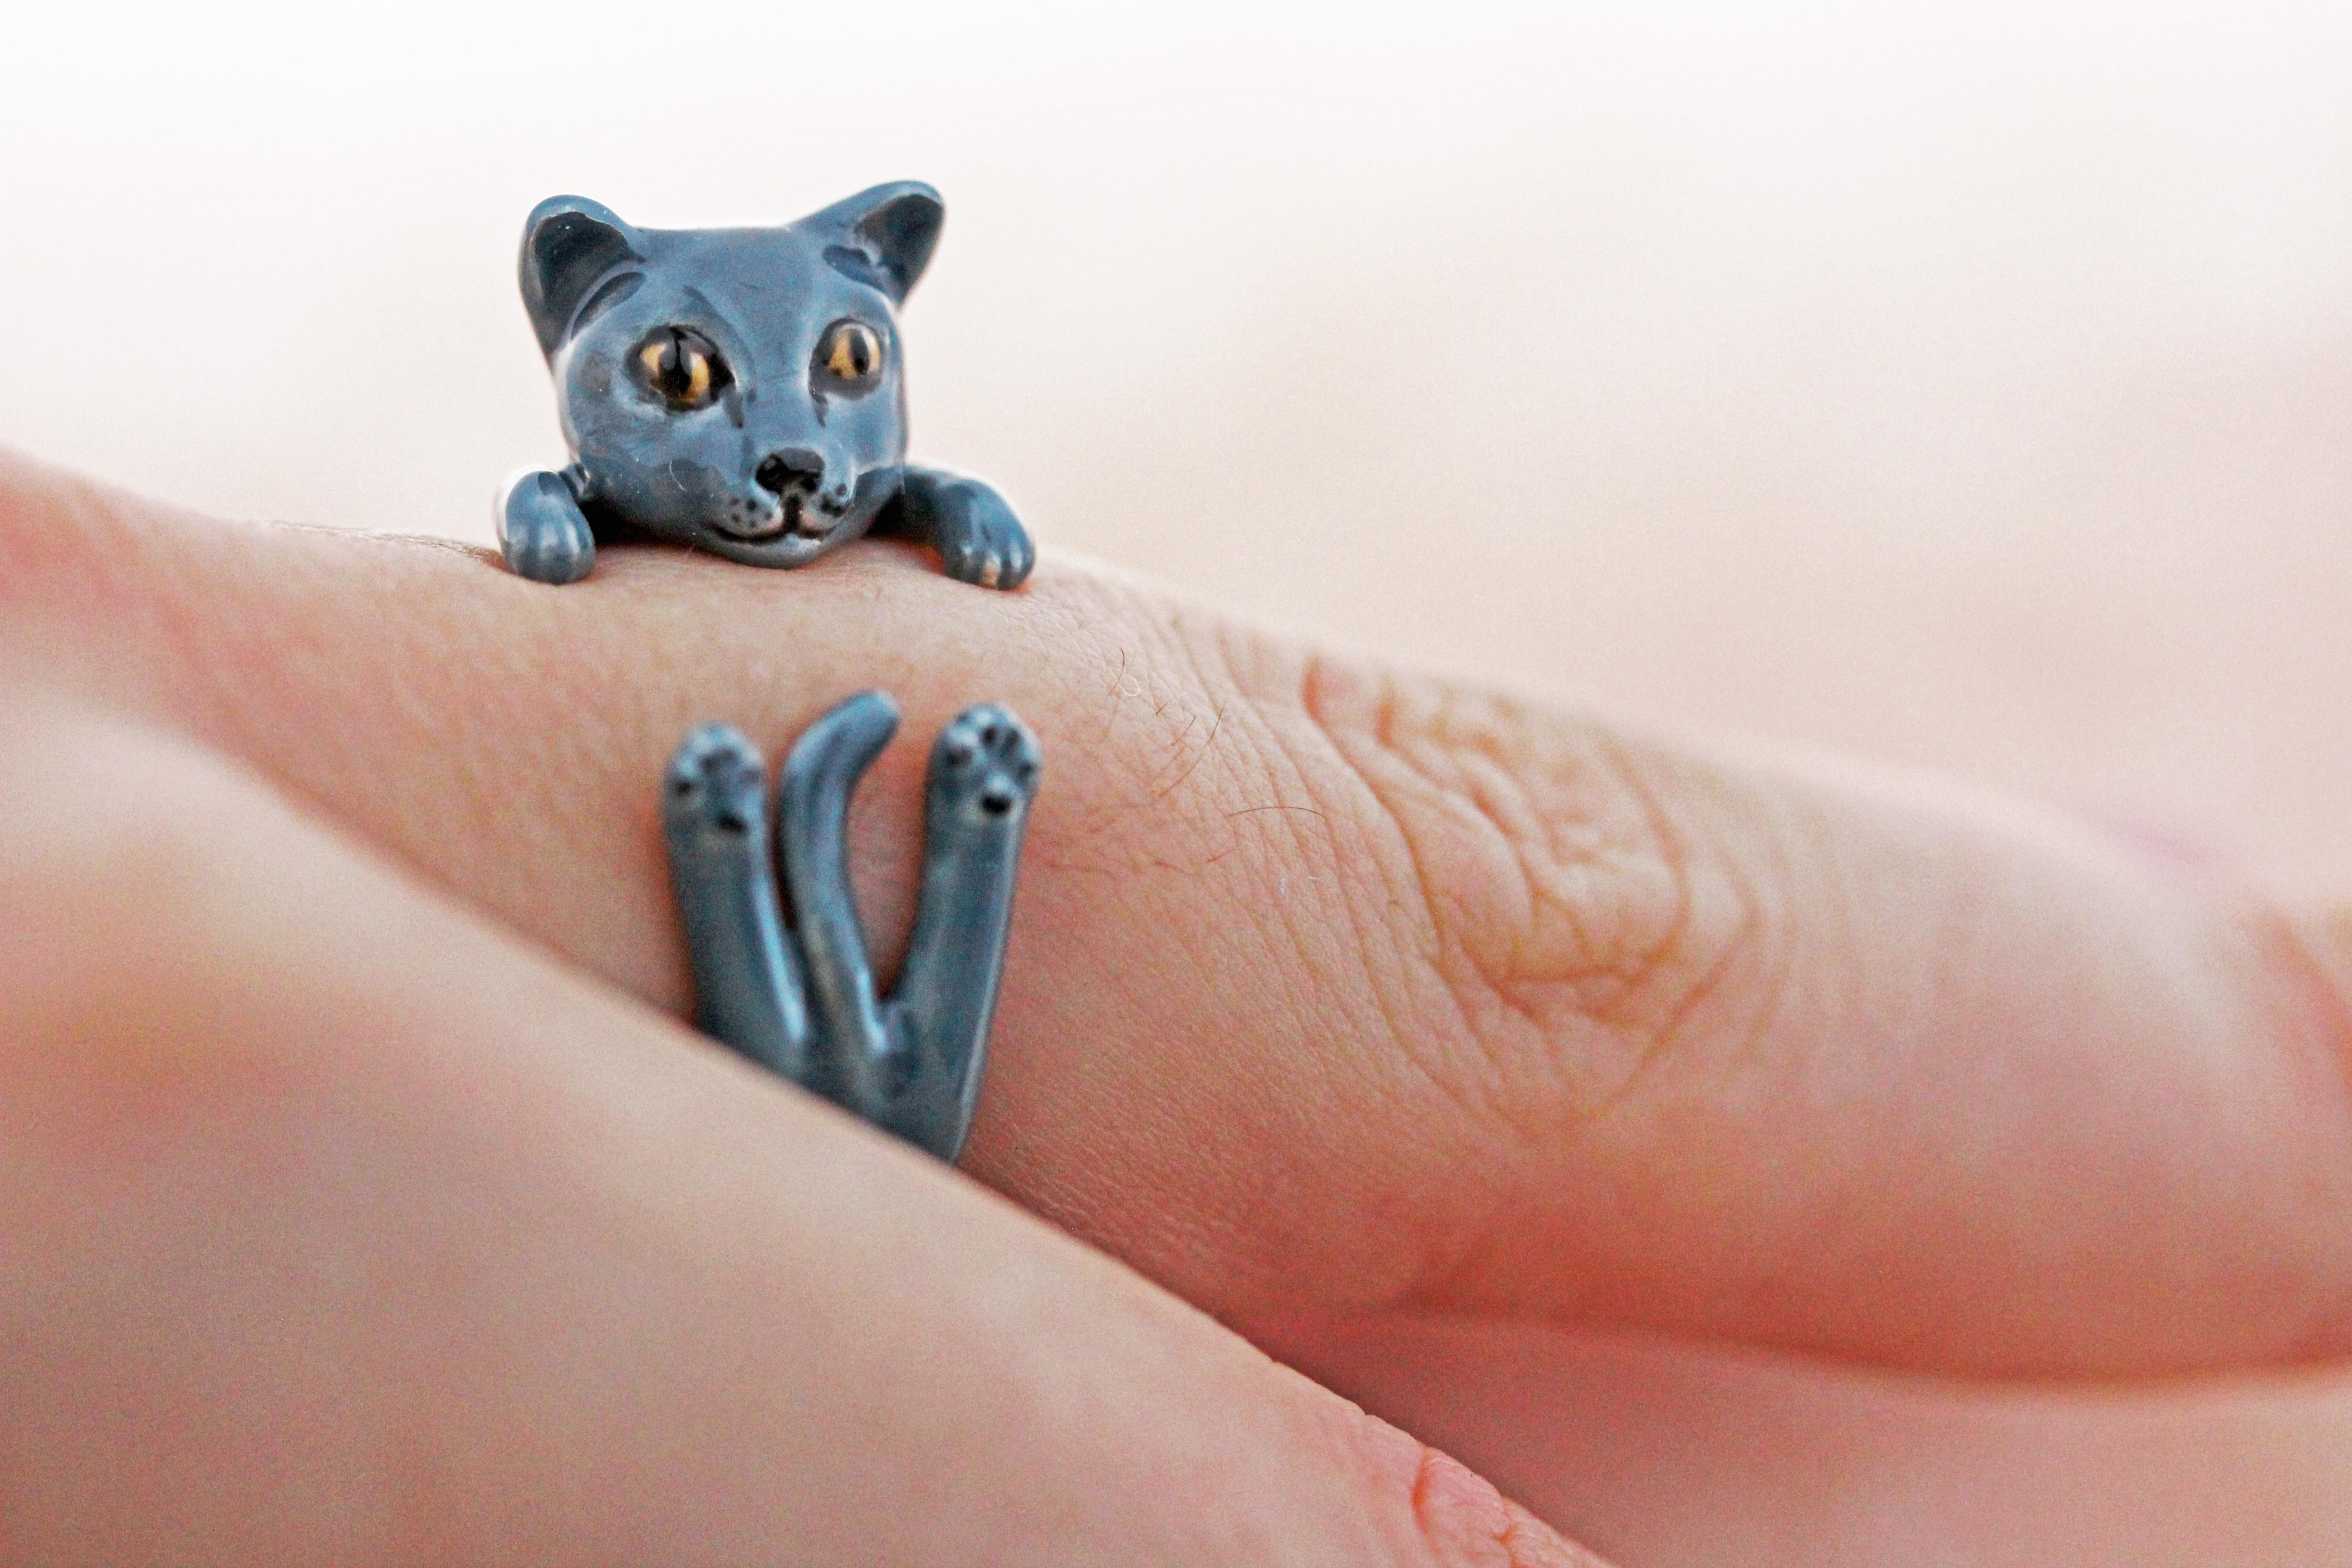 Ring made in sterling silver 925 featuring a grey Cat, thanks to amazing hand enamel life-like features is vividly rendered.   

The AVGVSTA Cat ring is hand made and 100% customizable.  
We offer free engraving-perfect for dog's name or the owner